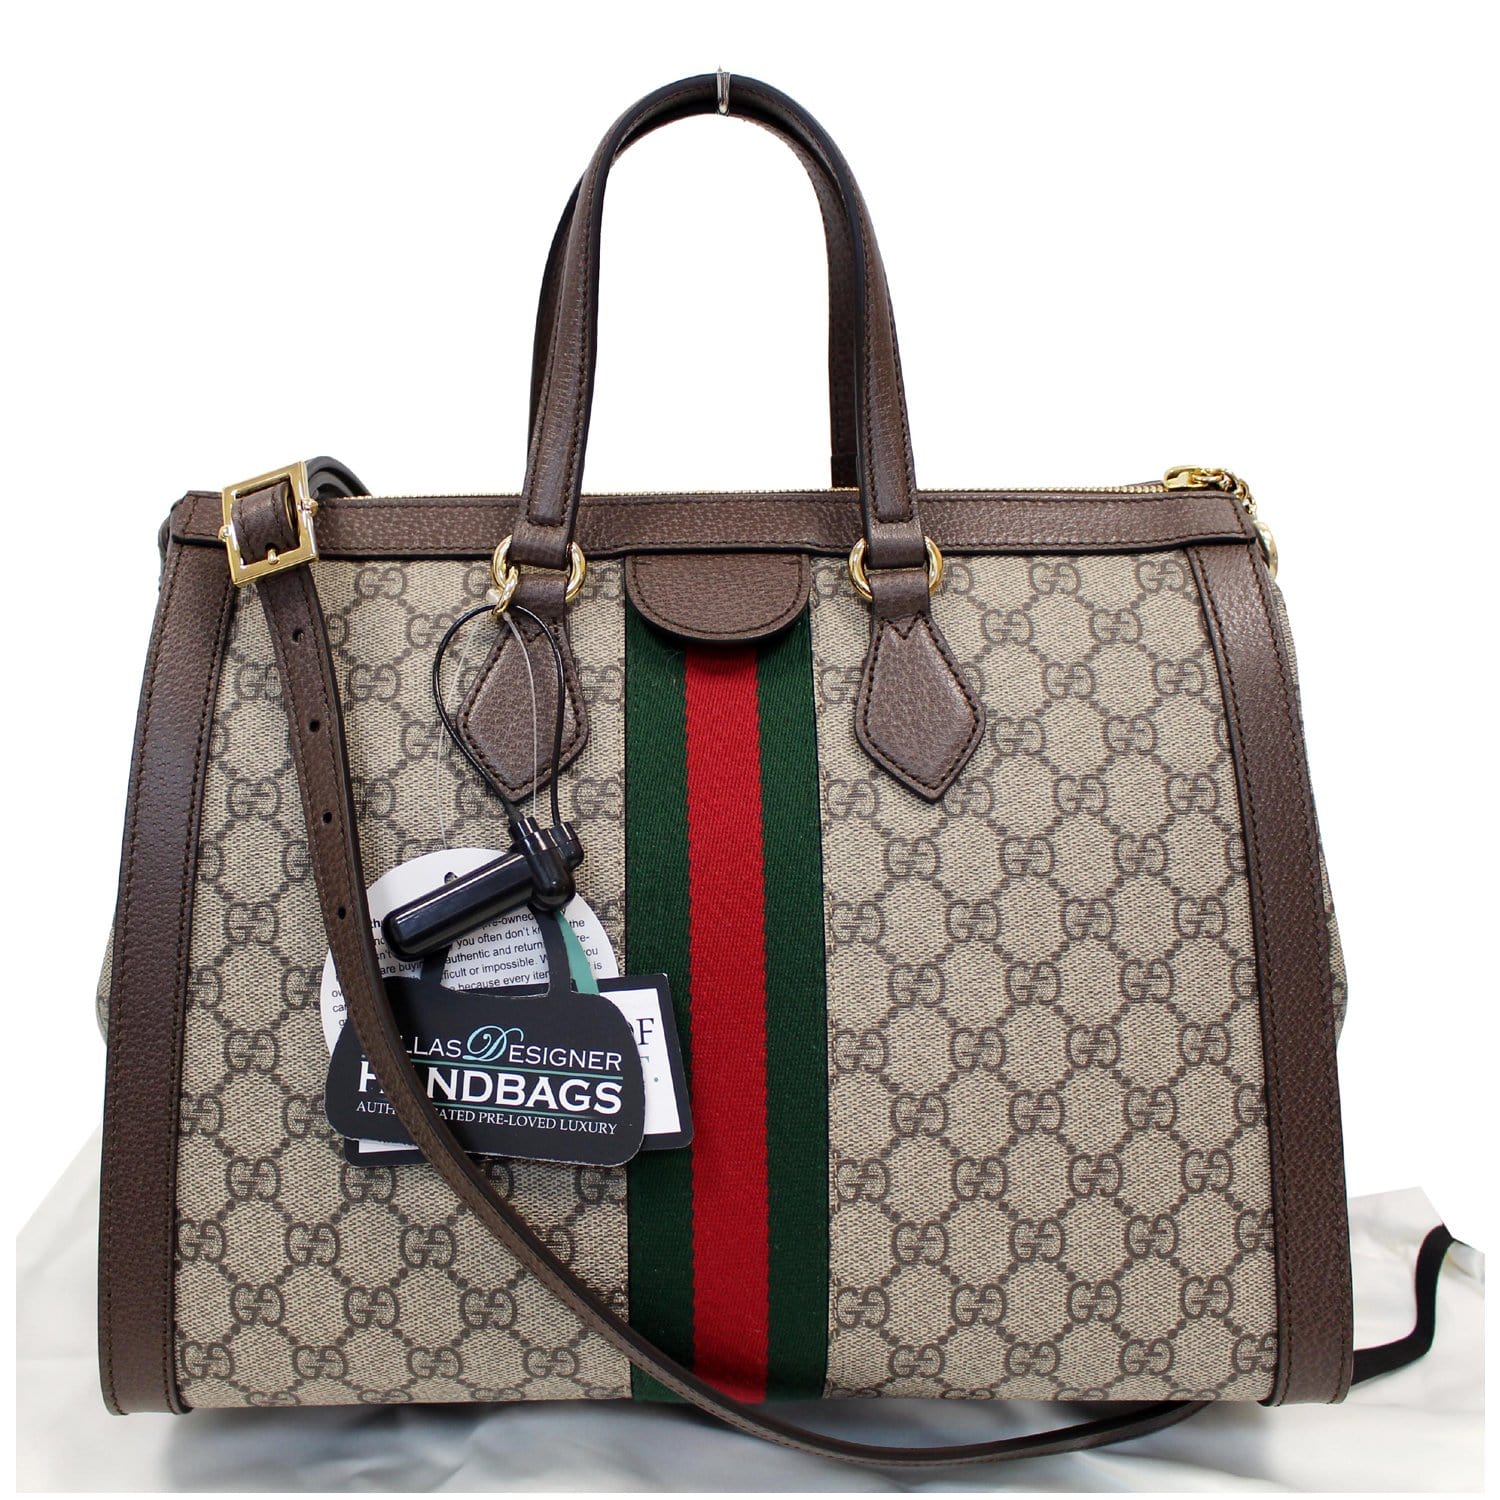 Gucci Pre-owned GG Supreme Ophidia Crossbody Bag